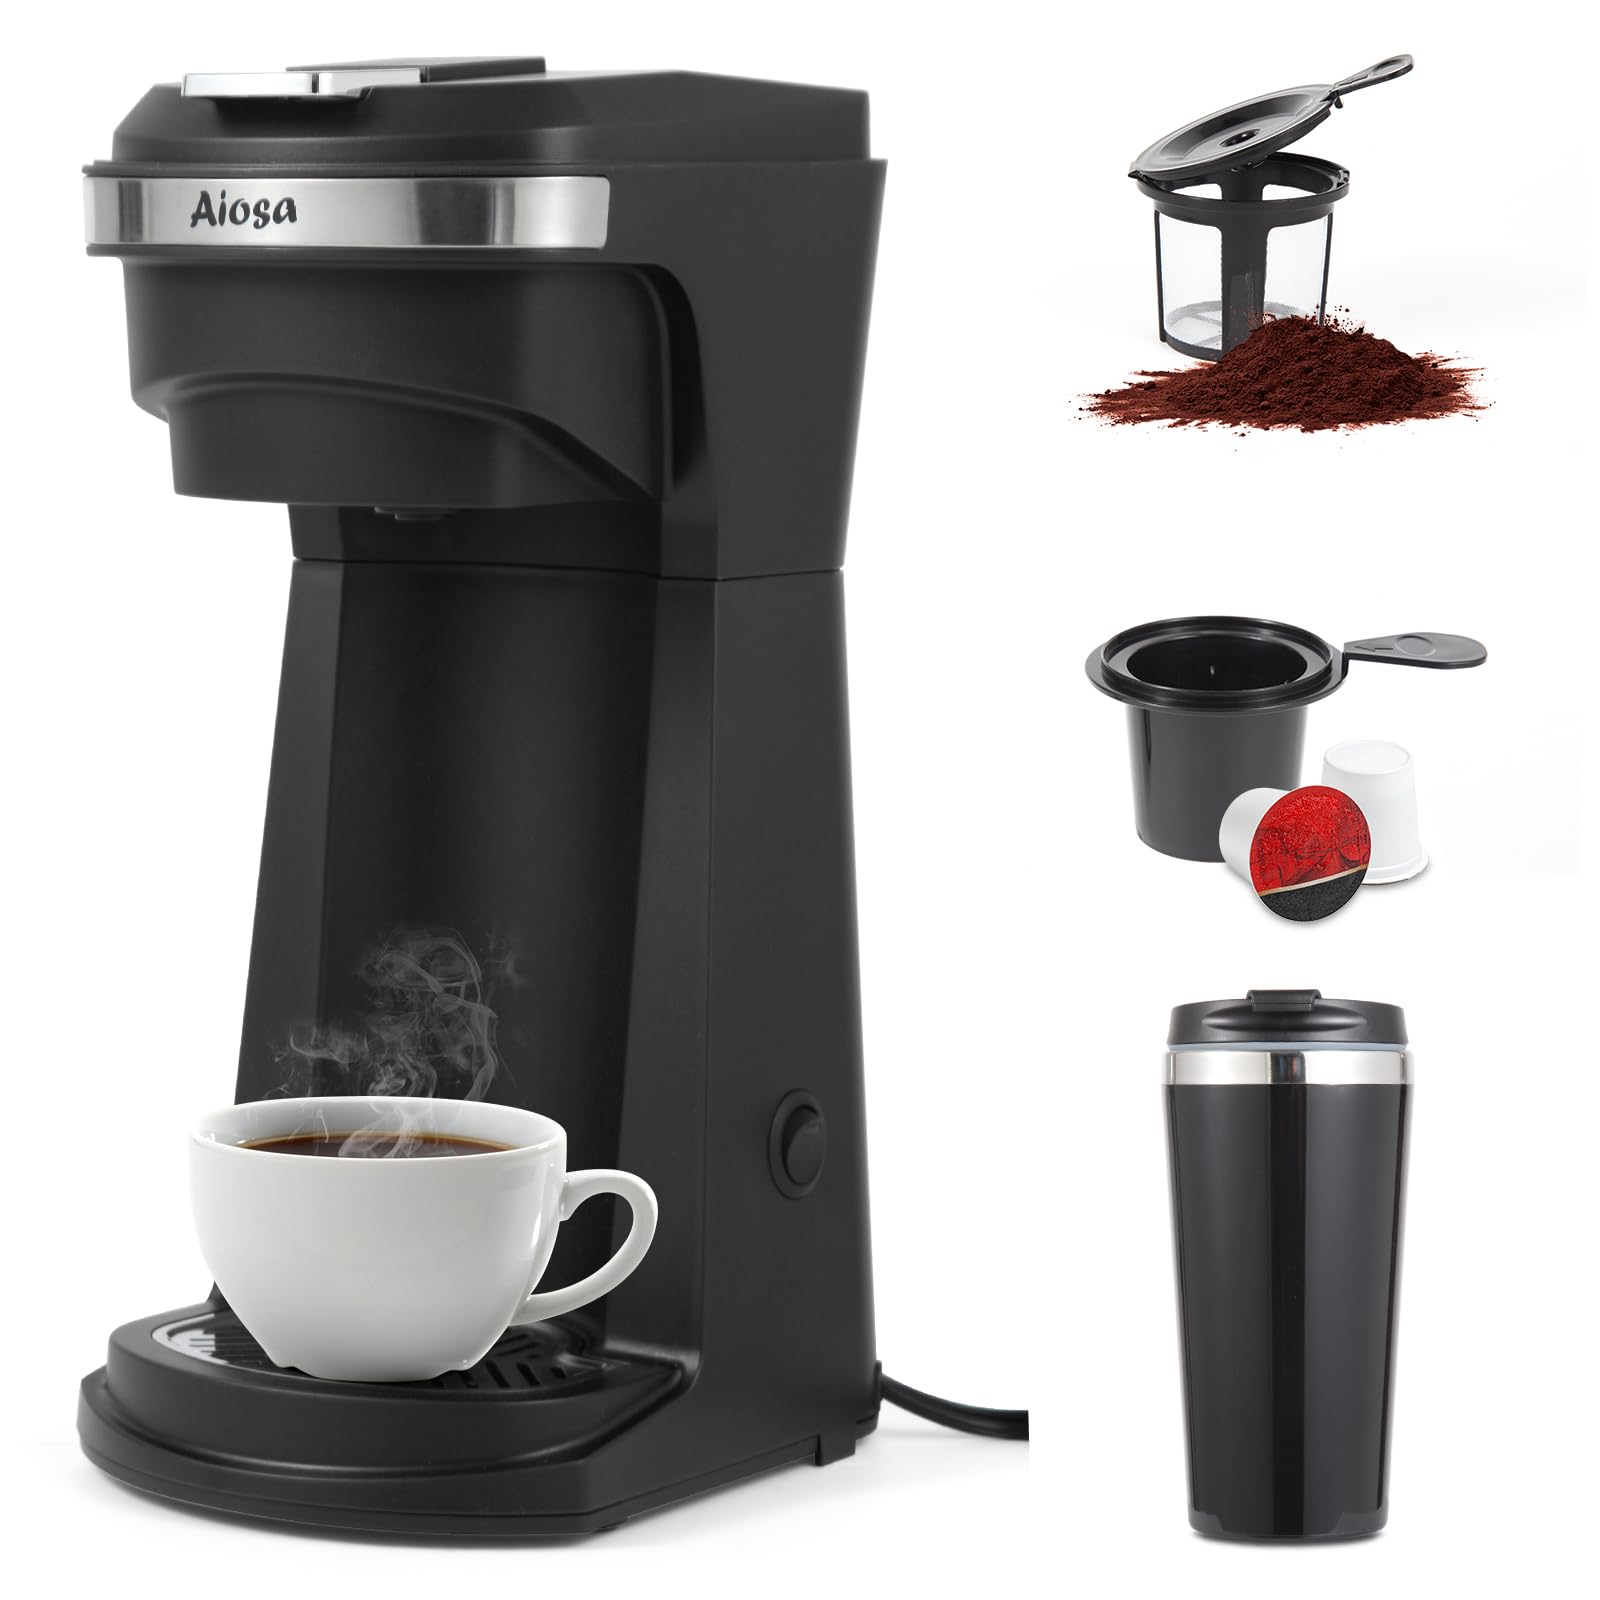 Aiosa Single Serve K Cup Coffee Maker And Ground Coffee Machine 2 in 1